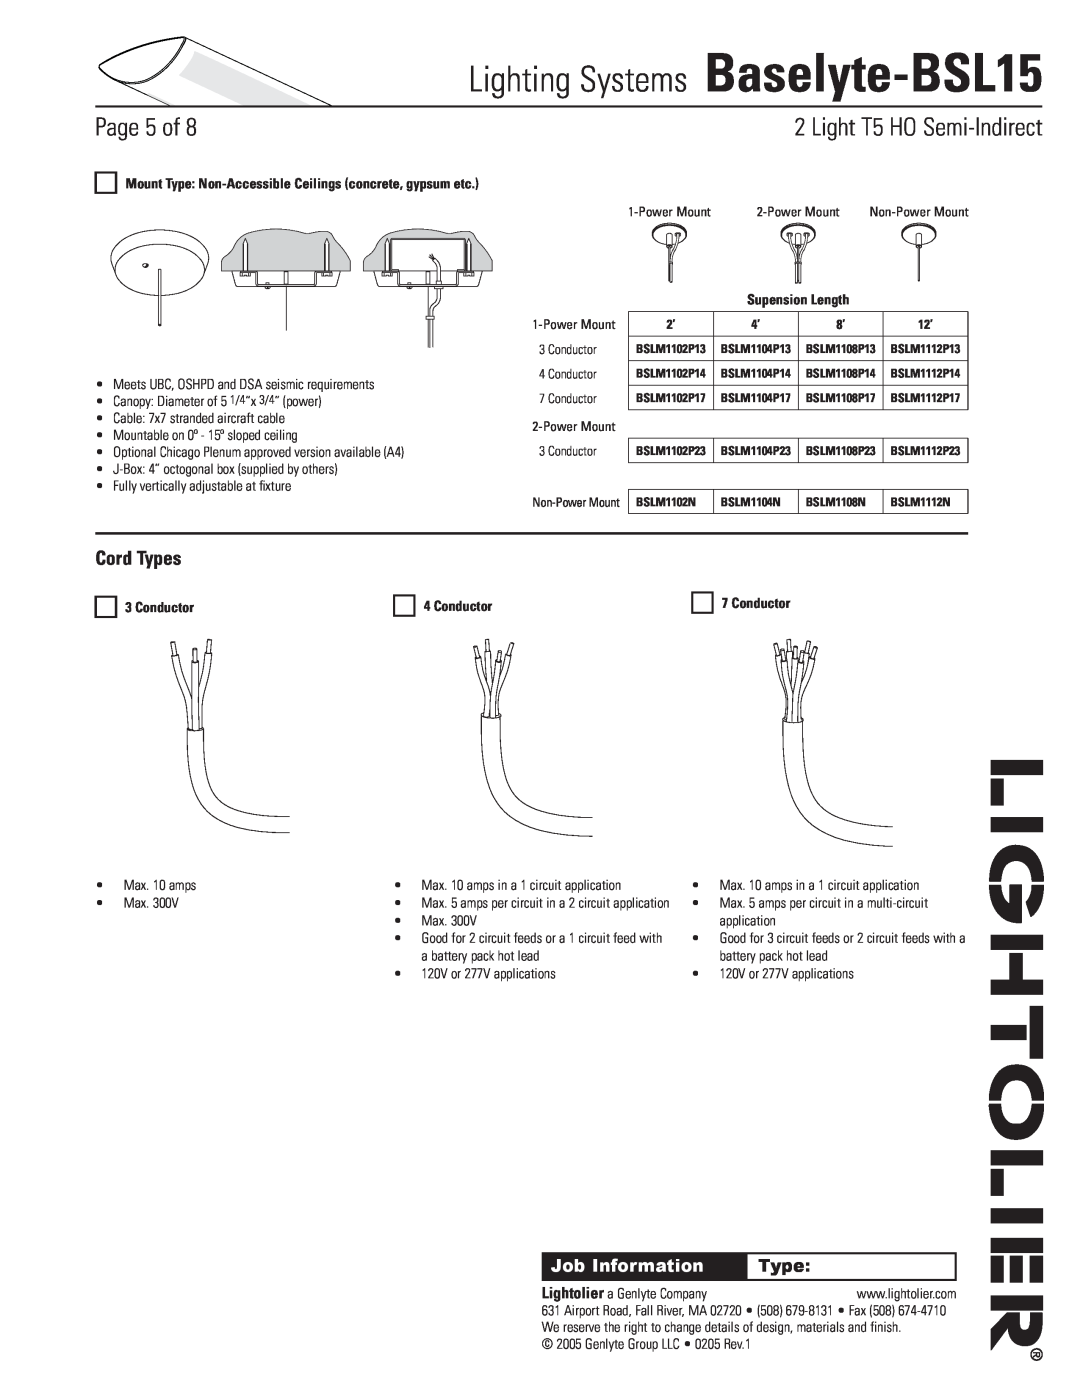 Lightolier Cord Types, Conductor, Lighting Systems Baselyte-BSL15, Page of, Light T5 HO Semi-Indirect, Job Information 